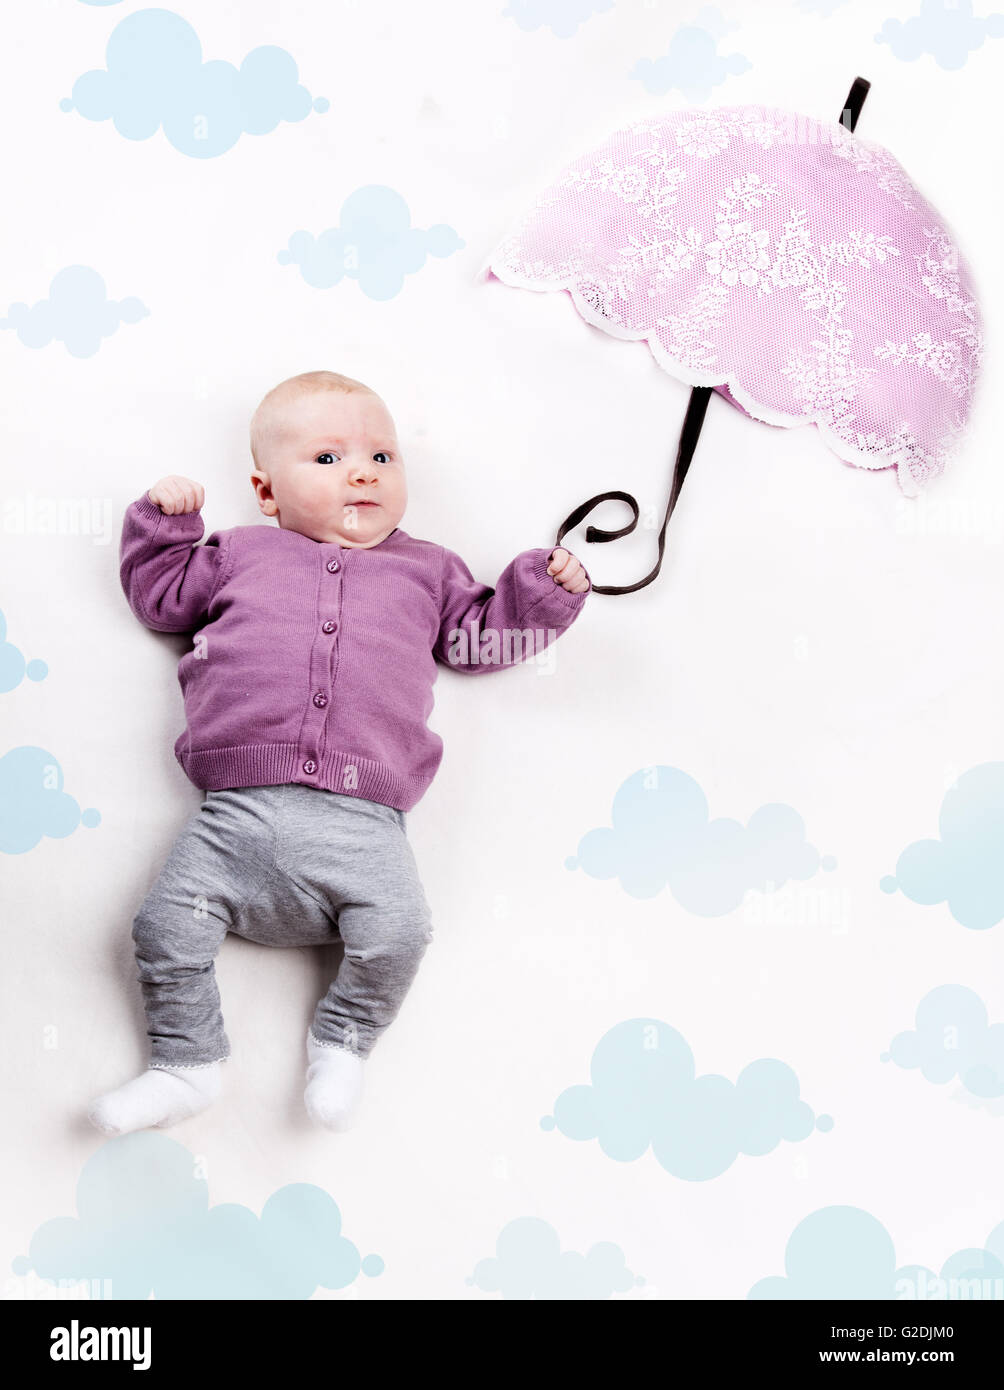 4 Month old Baby girl flying with cloth umbrella Stock Photo